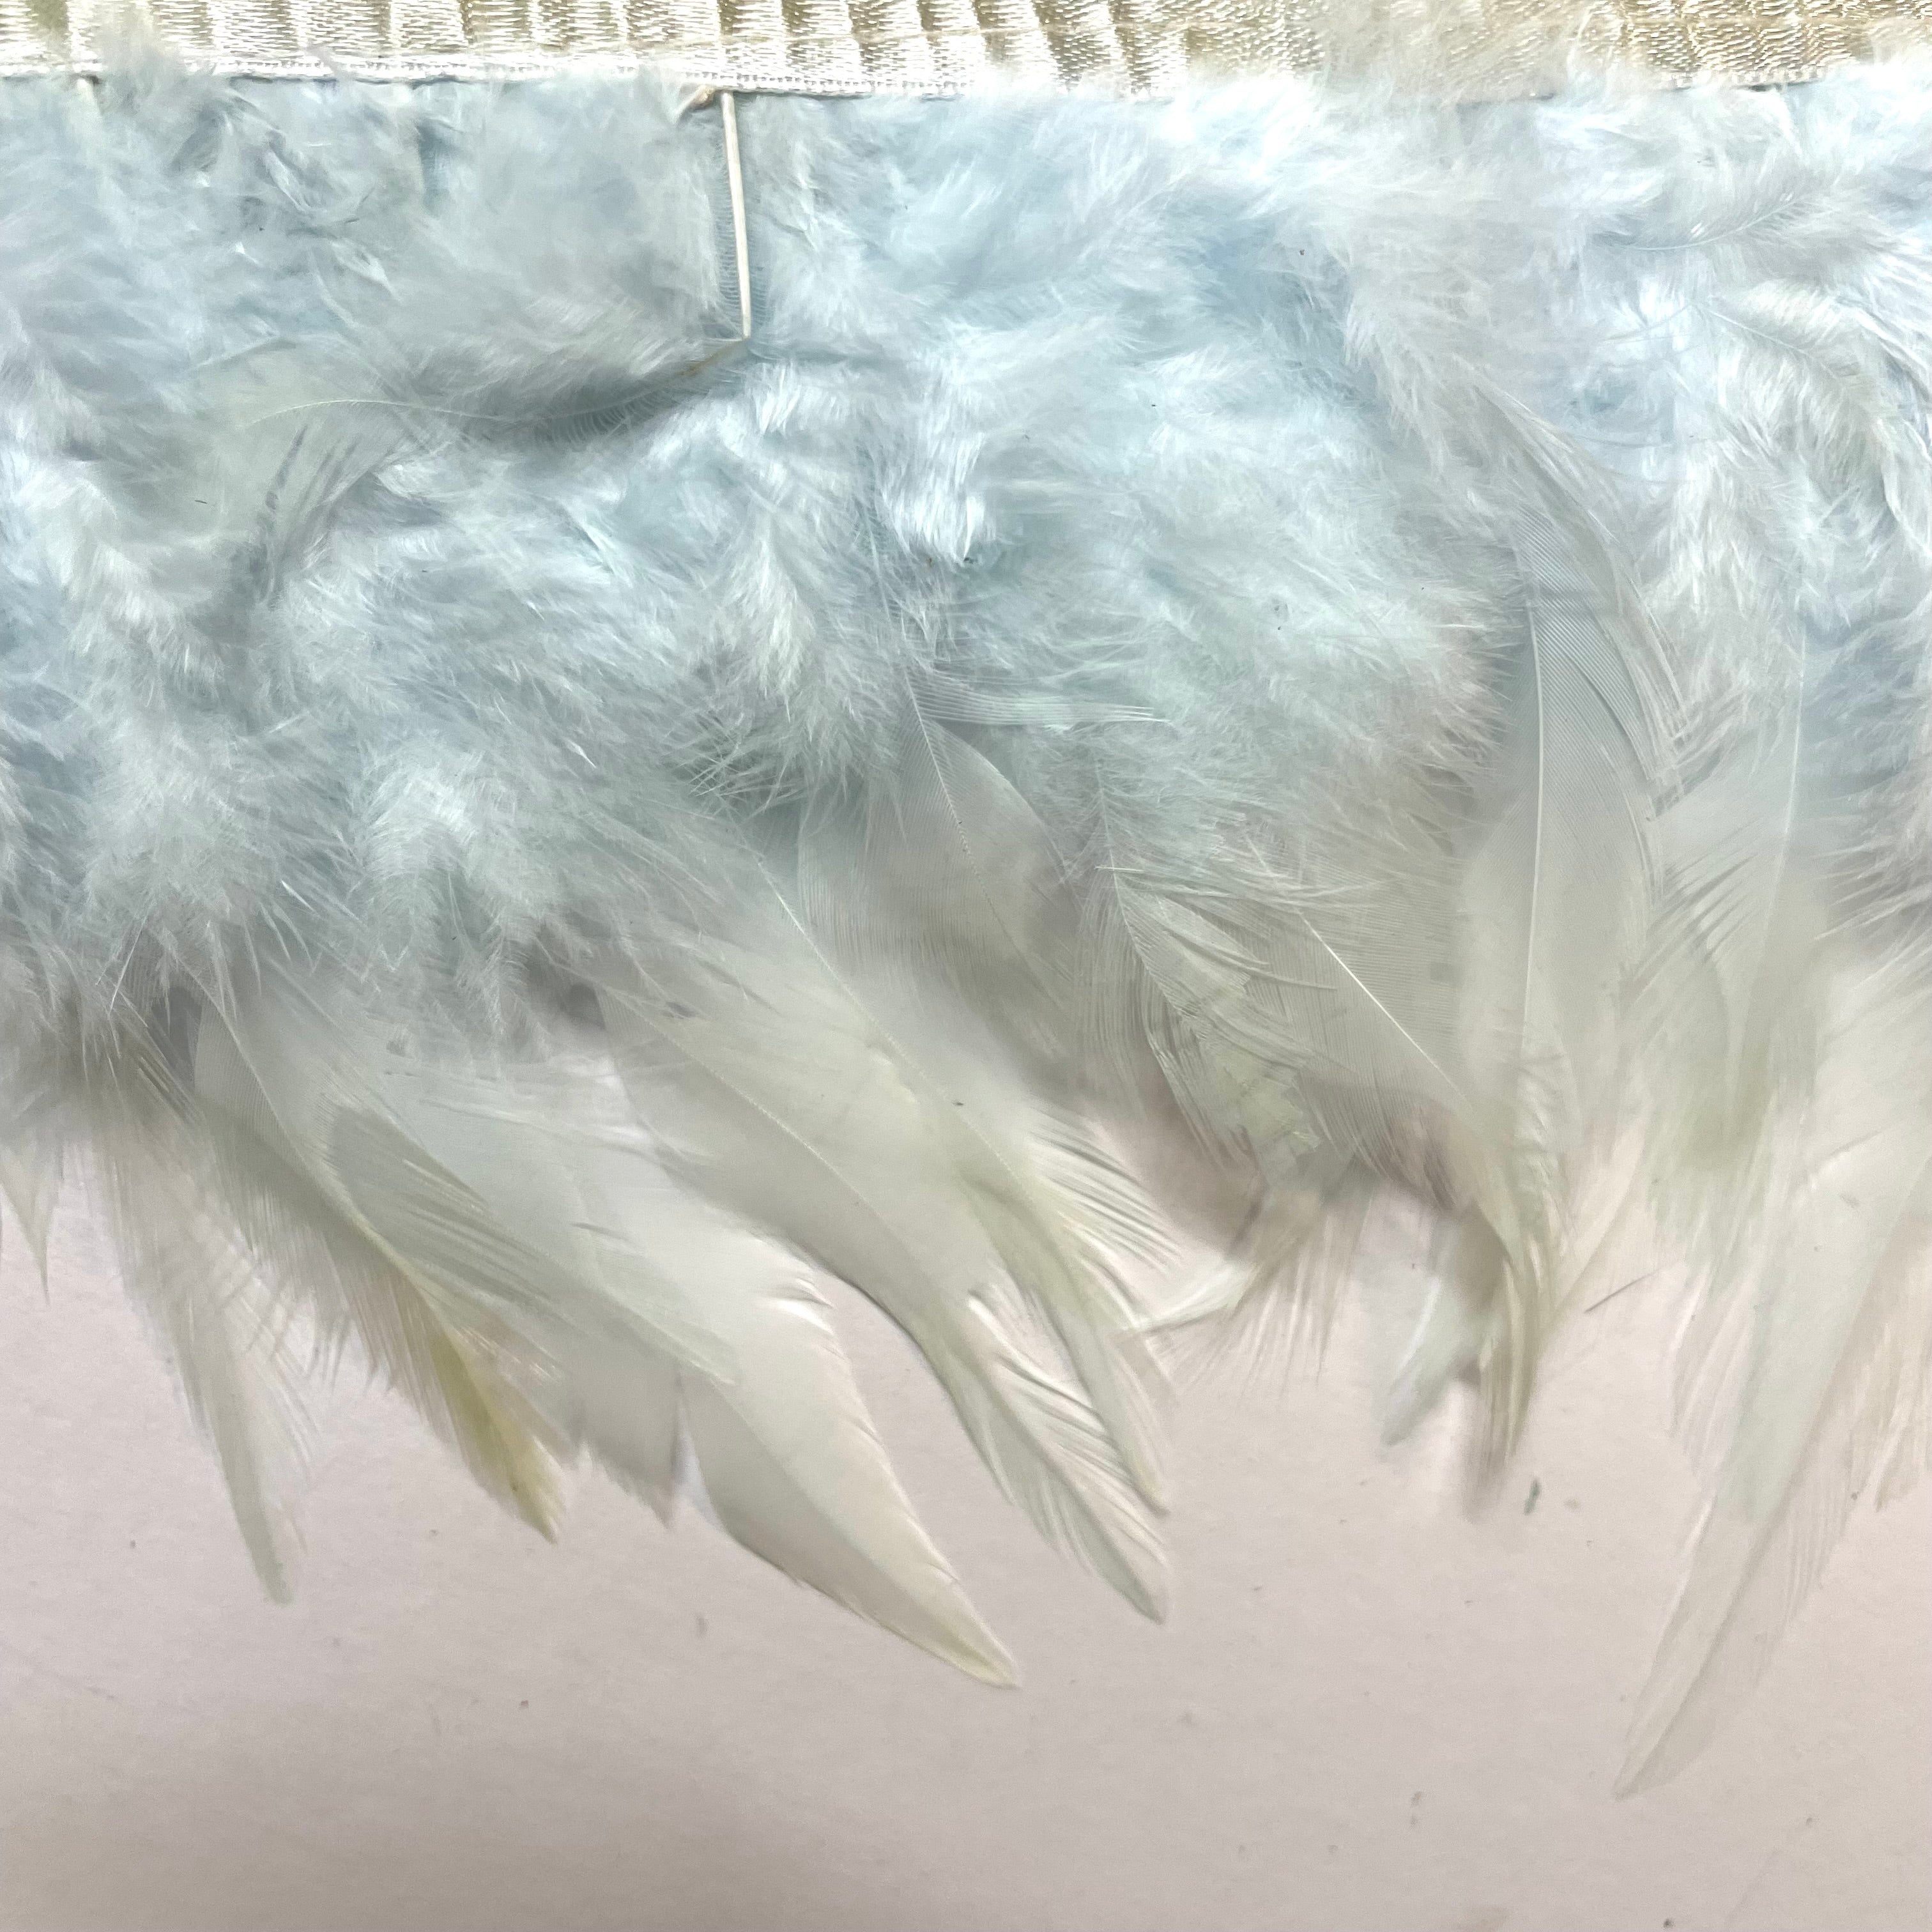 Hackle Saddle Rooster Feather RIBBON Strung per metre - Baby Light Blue